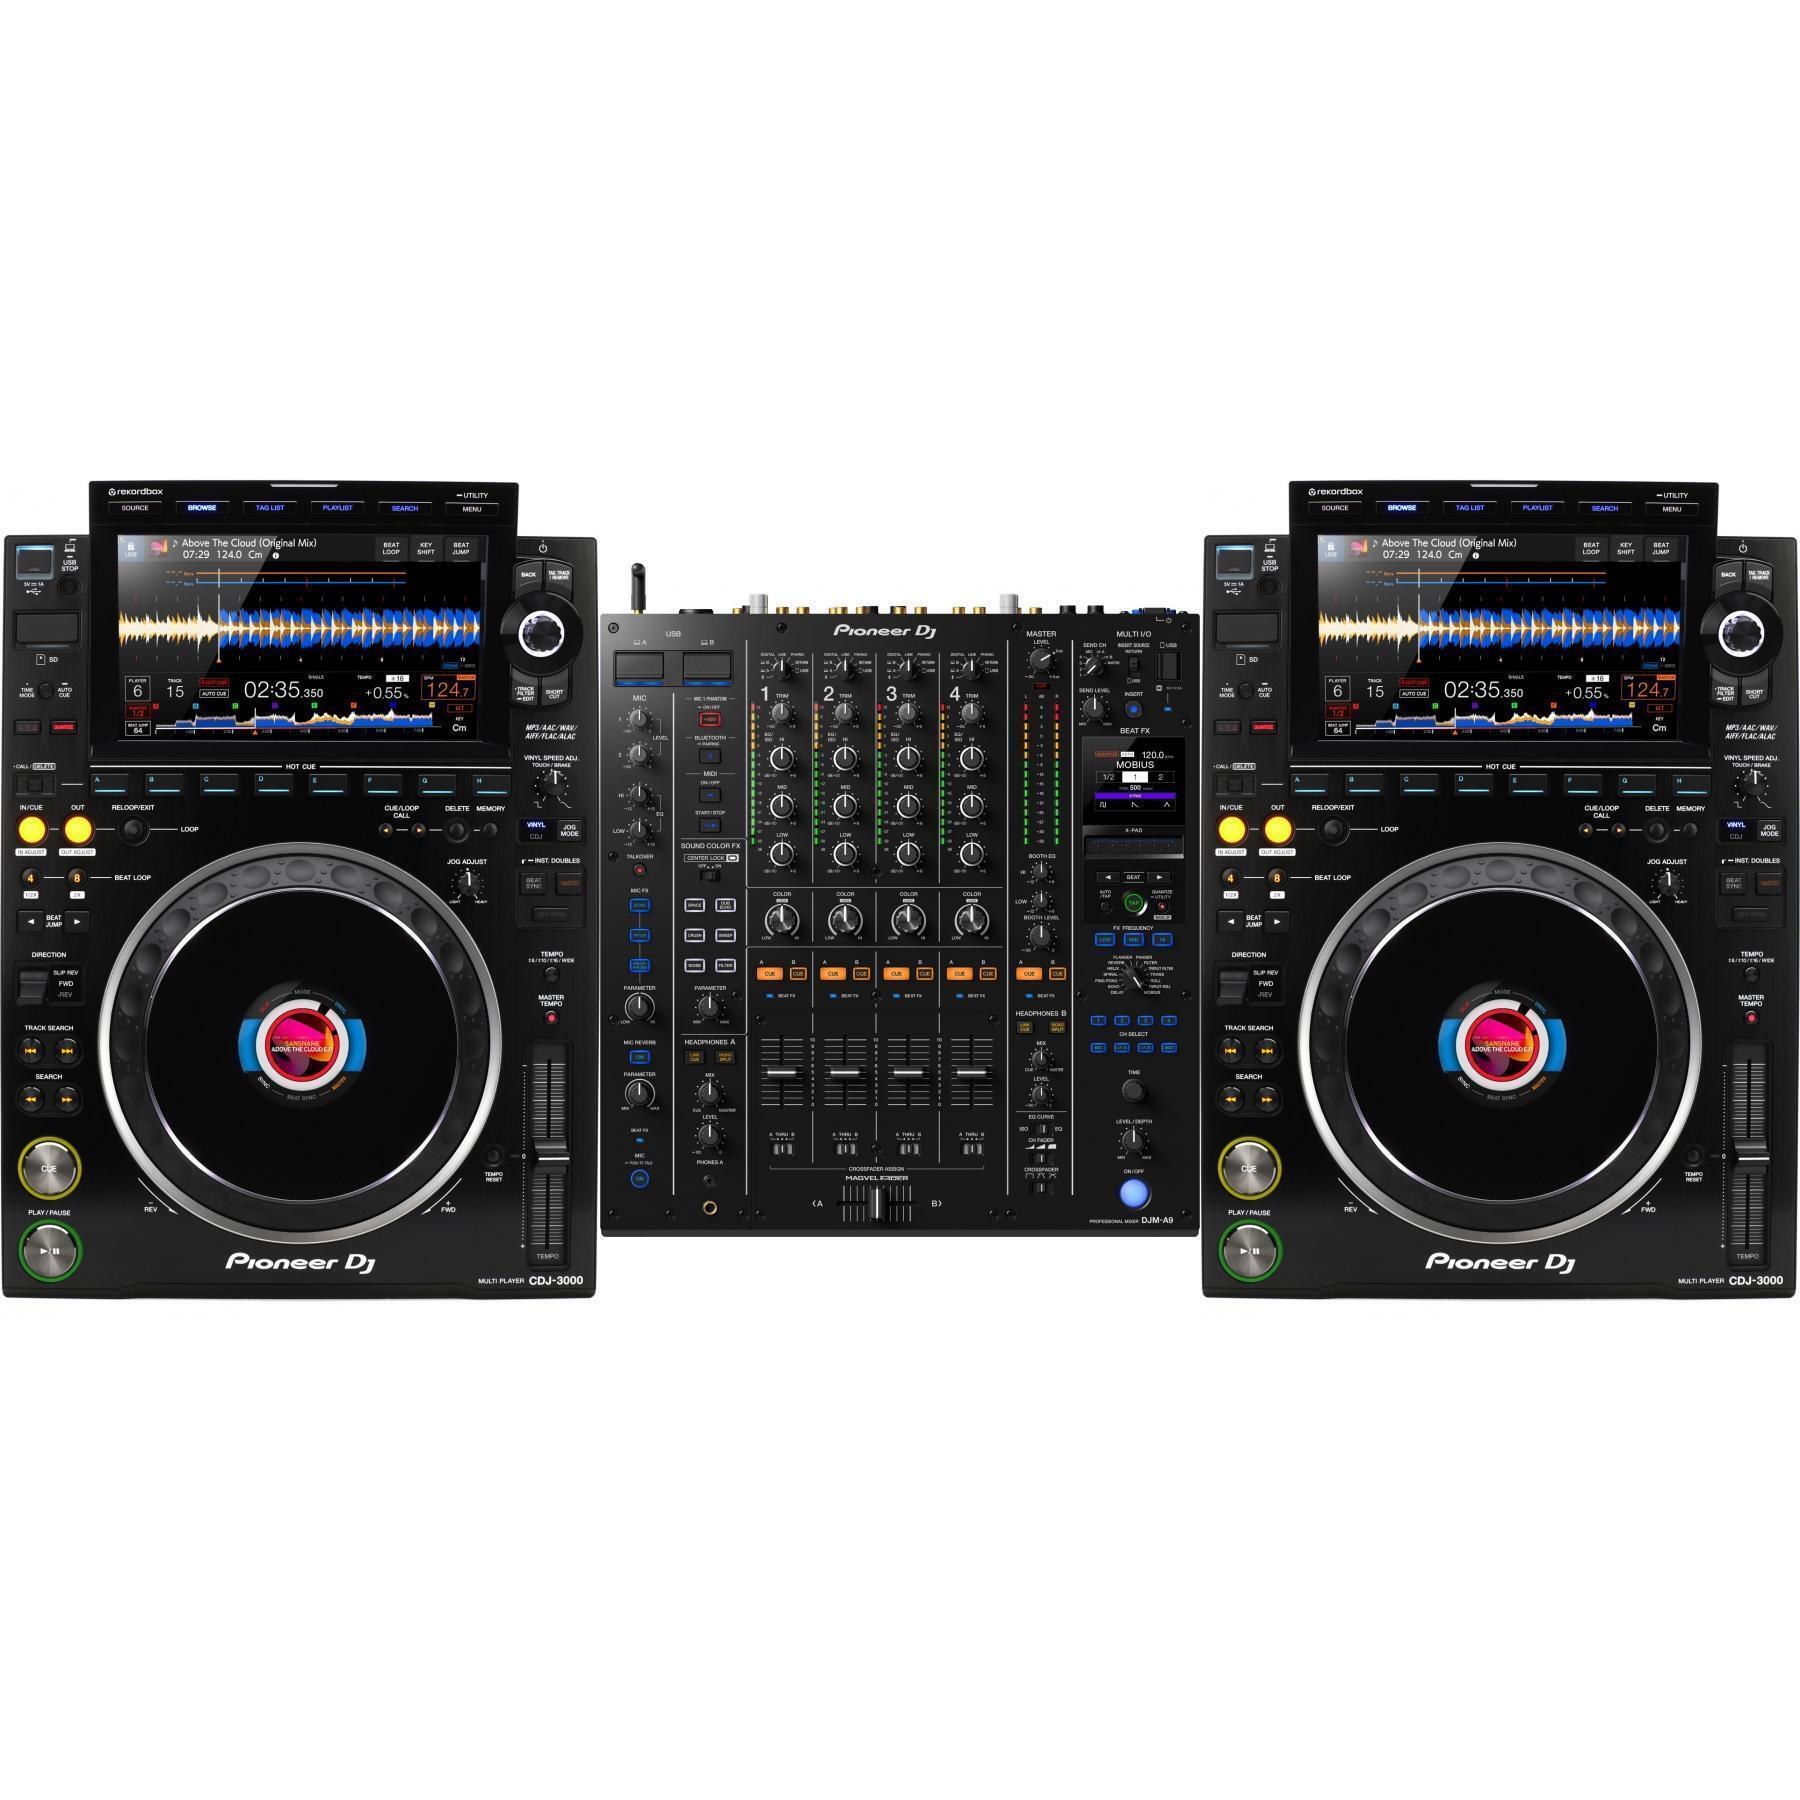 Pioneer DJ DJM-A9 4-channel DJ Mixer with Effects and Dual CDJ3000